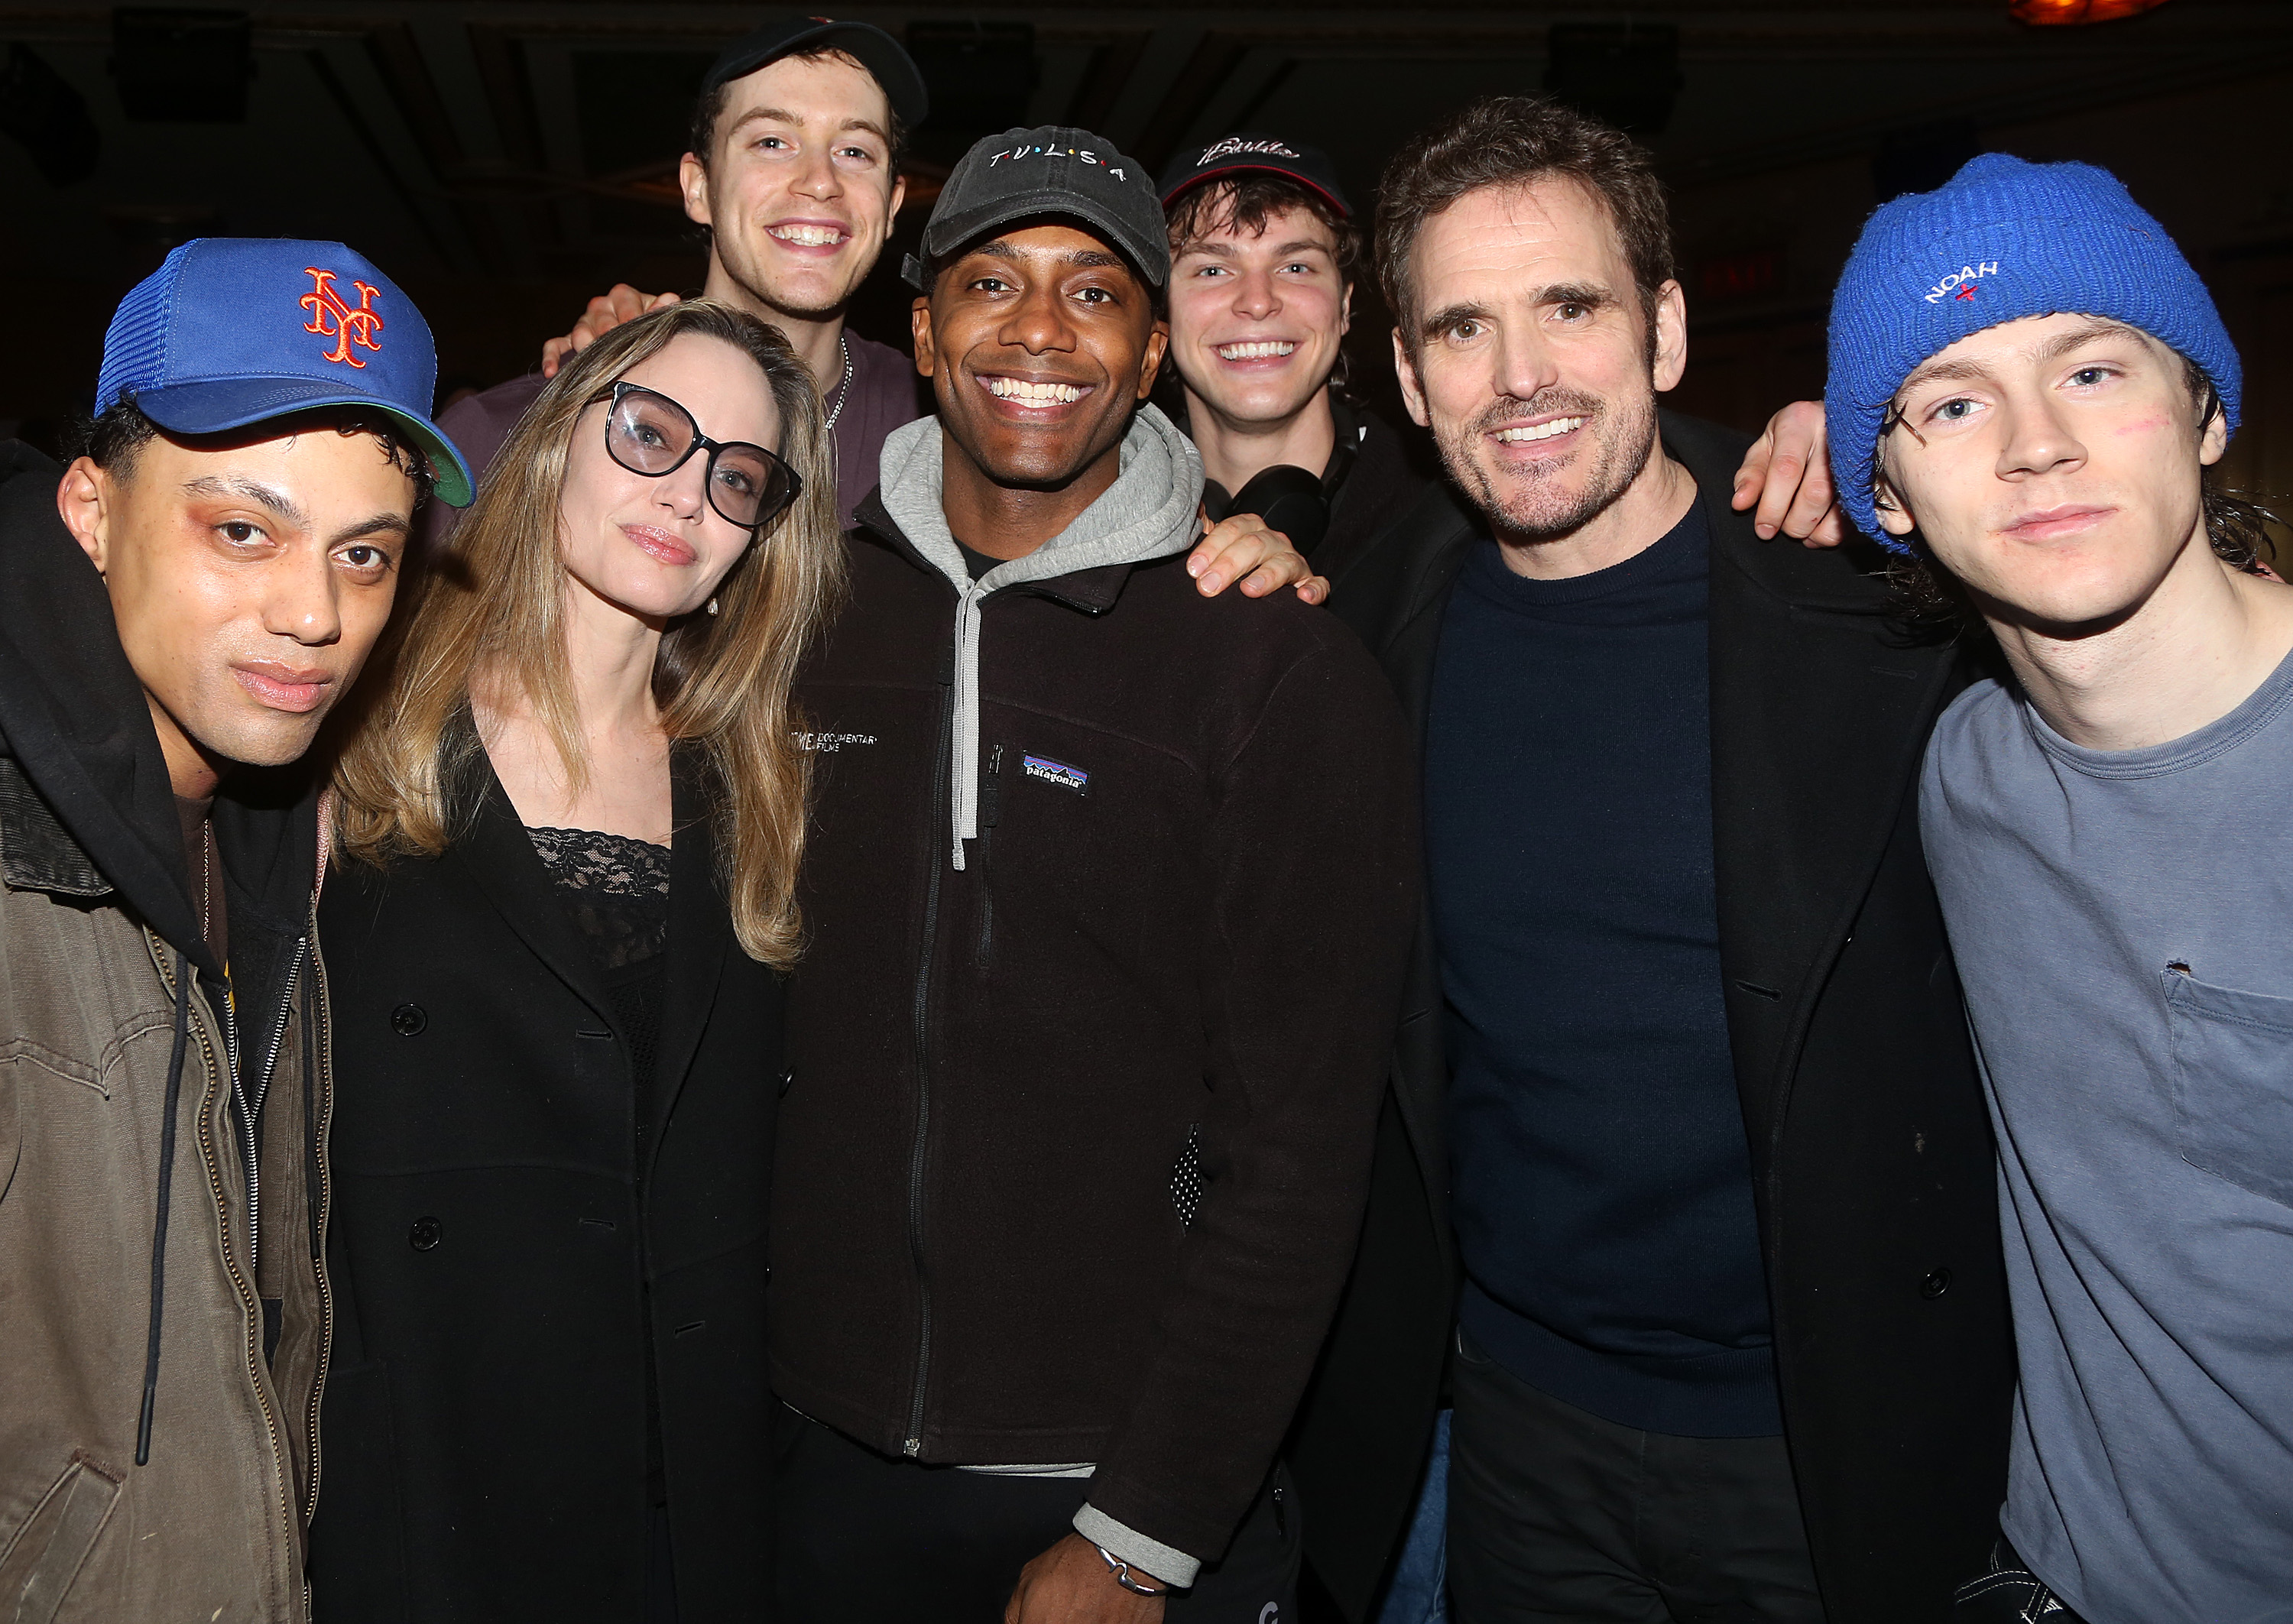 Sky Lakota-Lynch, Angelina Jolie, Kevin William Paul, Brent Comer, Joshua Boone, Joshua Schmidt, Matt Dillon, Brody Grant backstage at the new musical based on the classic book "The Outsiders" on Broadway at The Bernard B. Jacobs Theatre on April 3, 2024 in New York City | Source: Getty Images